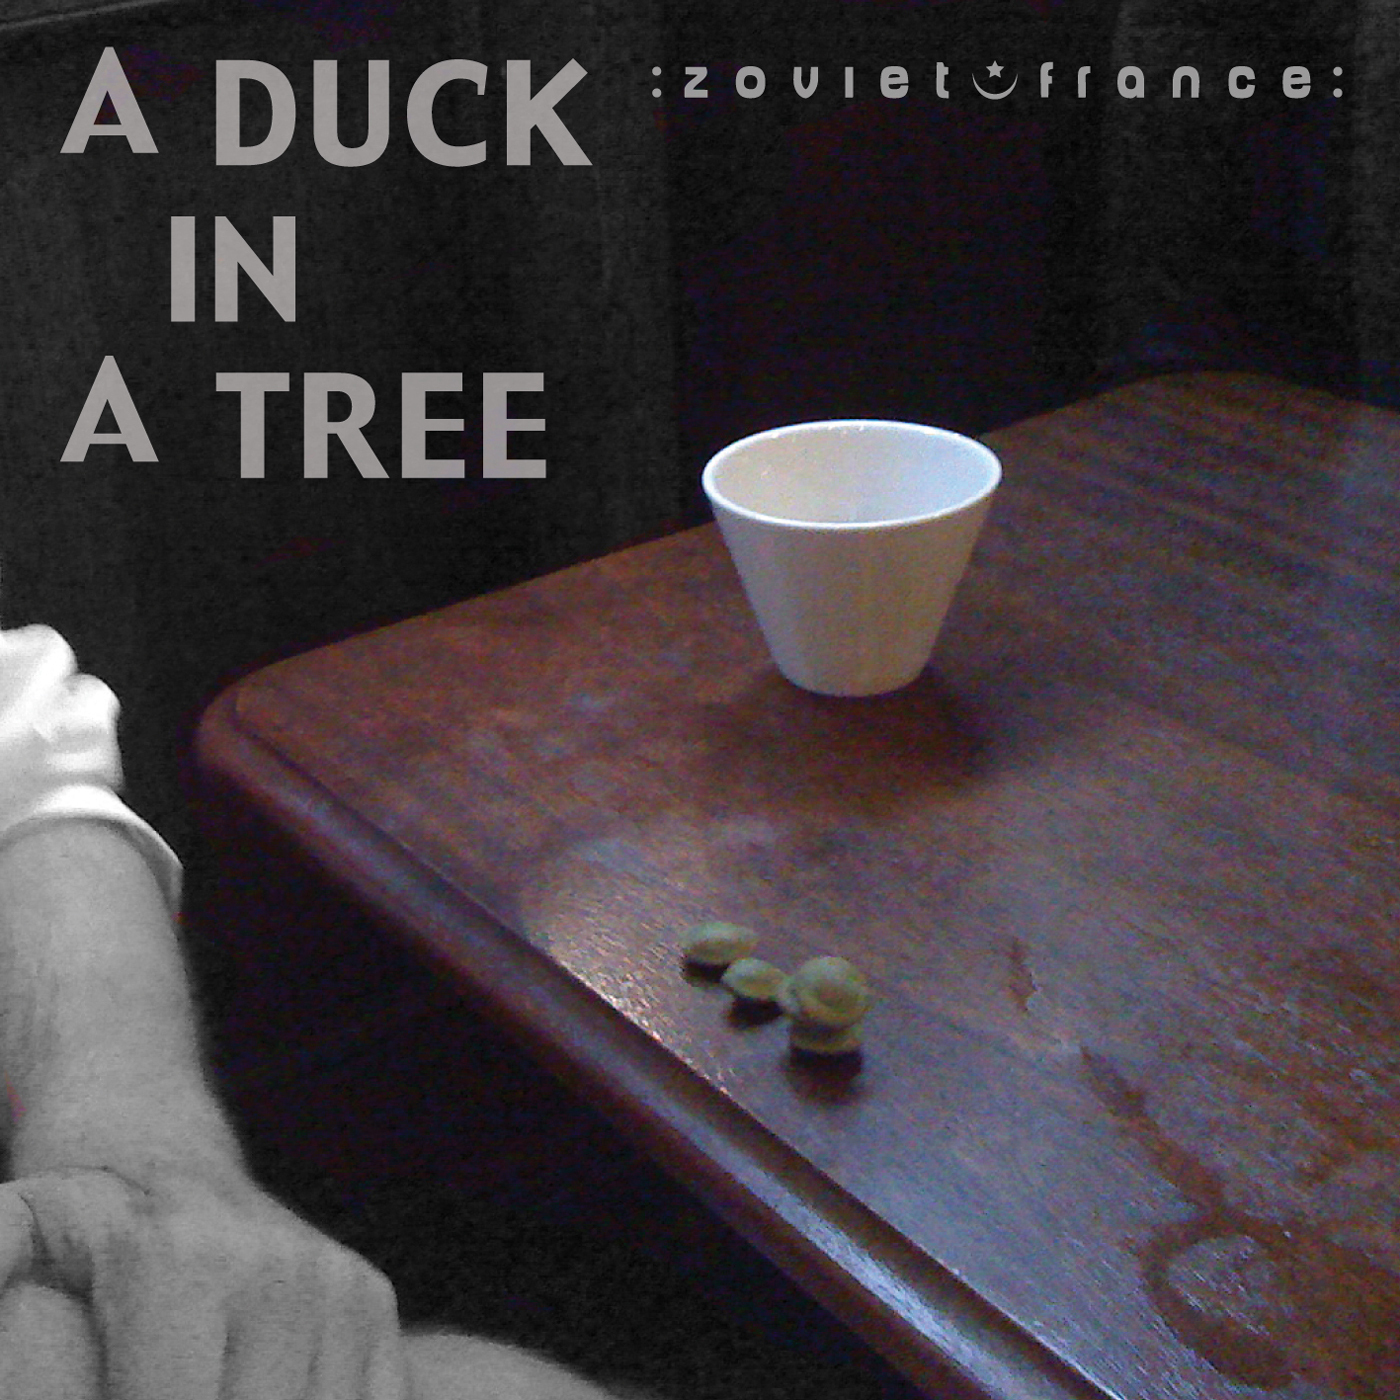 A-Duck-in-a-Tree-2013-01-19-_-Visibly-Naked-to-the-Eye-layout-1400.jpg